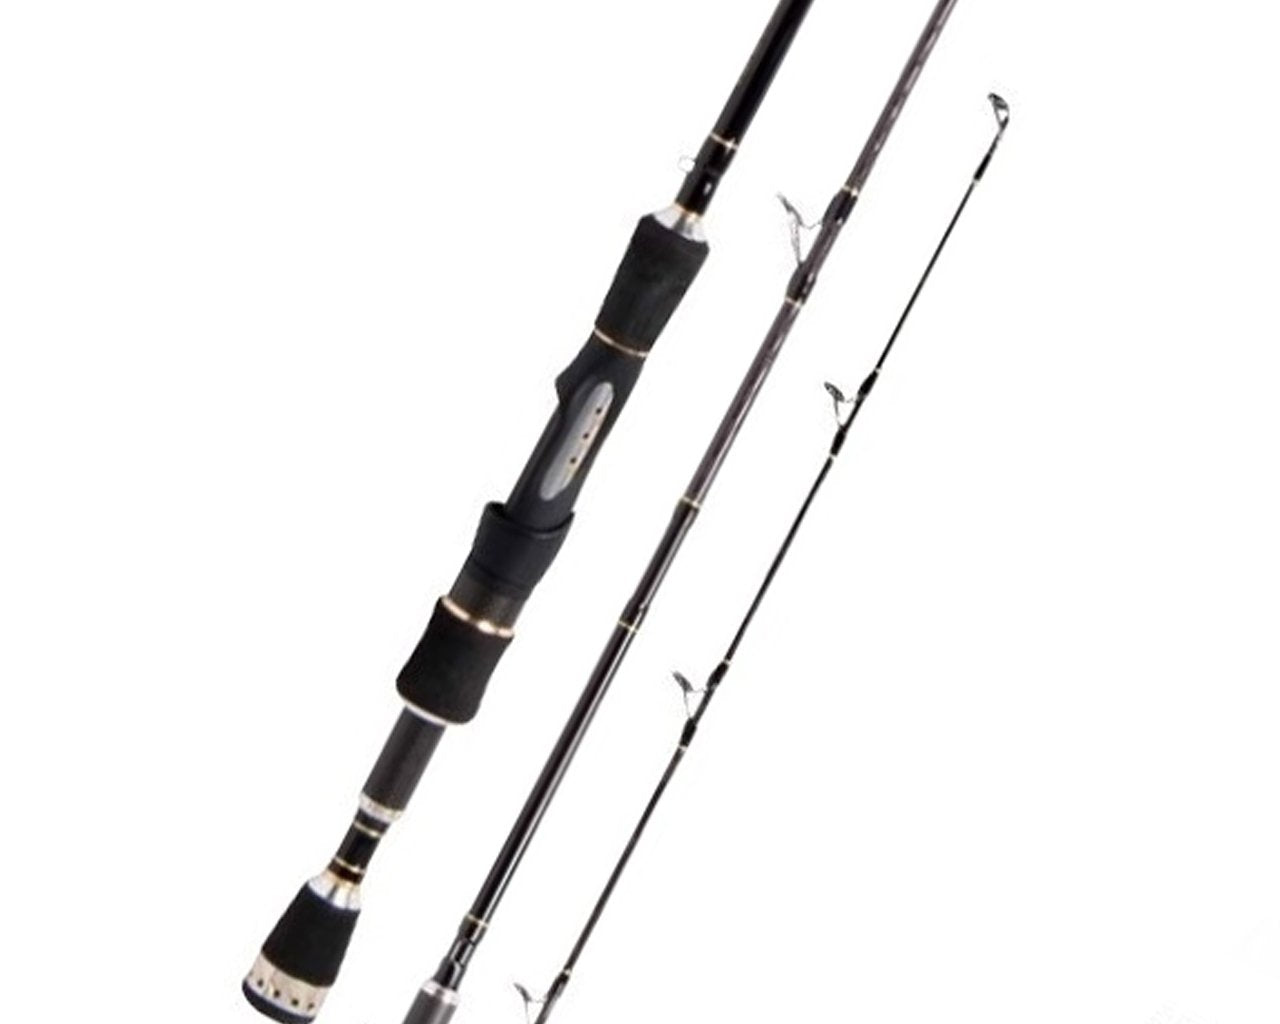 Fishing Rods For Sale - Shop for Spin, Overhead, Baitcast & more